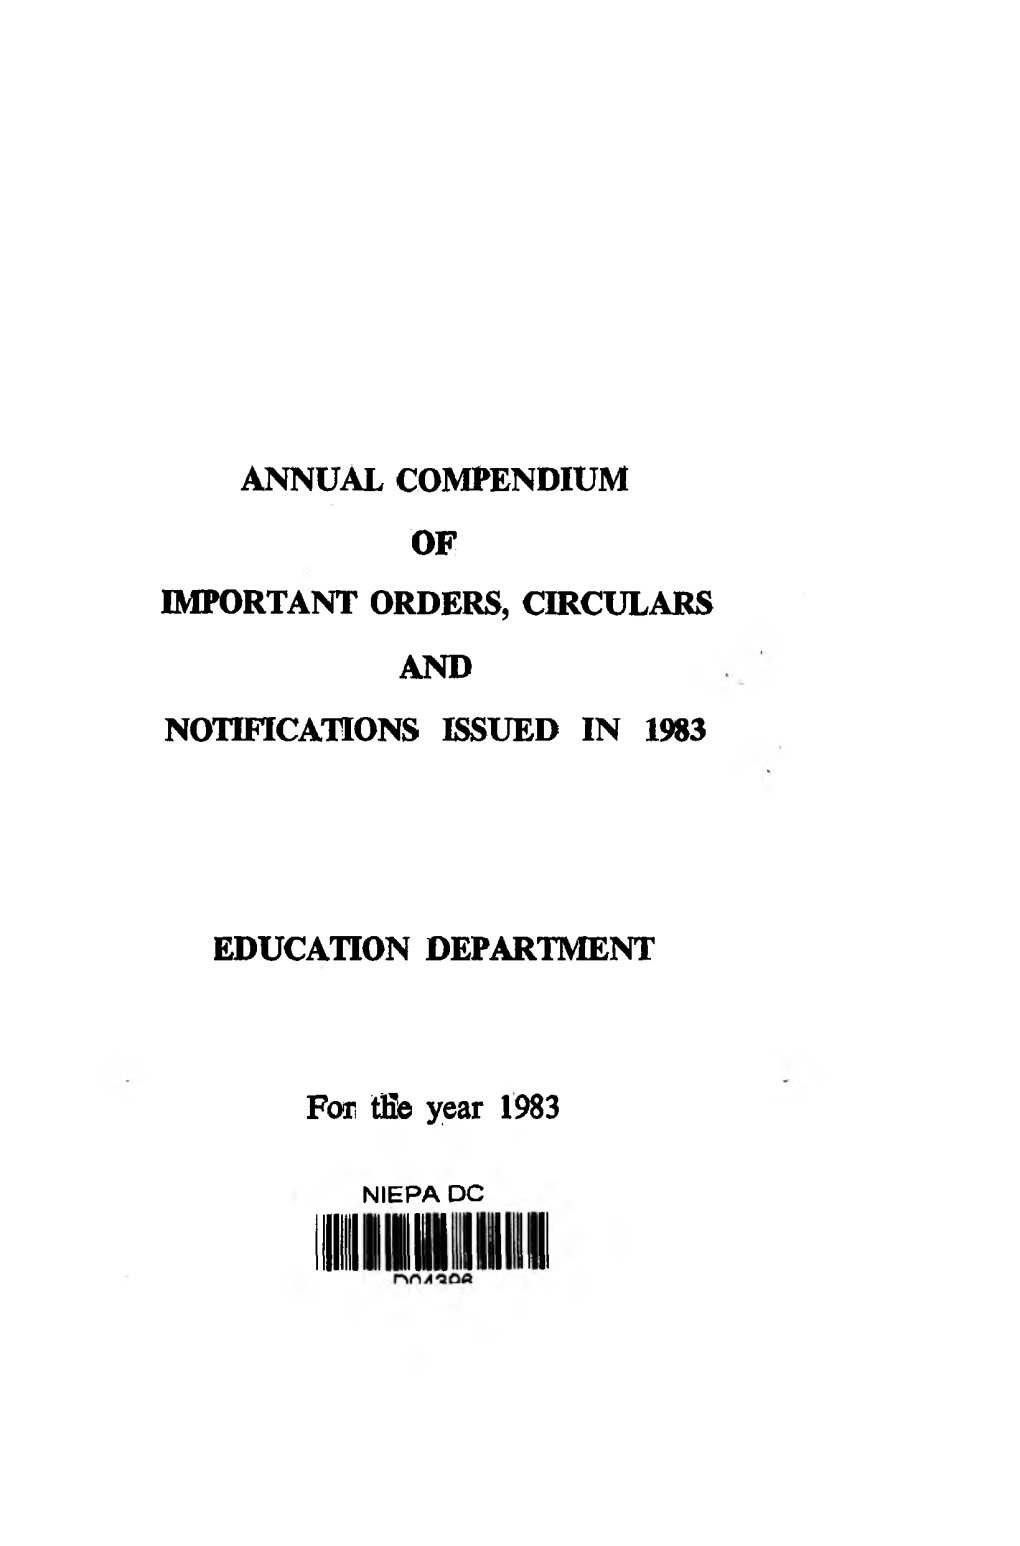 Annual Compendium of Important Orders, Circulars and Notifications Issued in 19»3